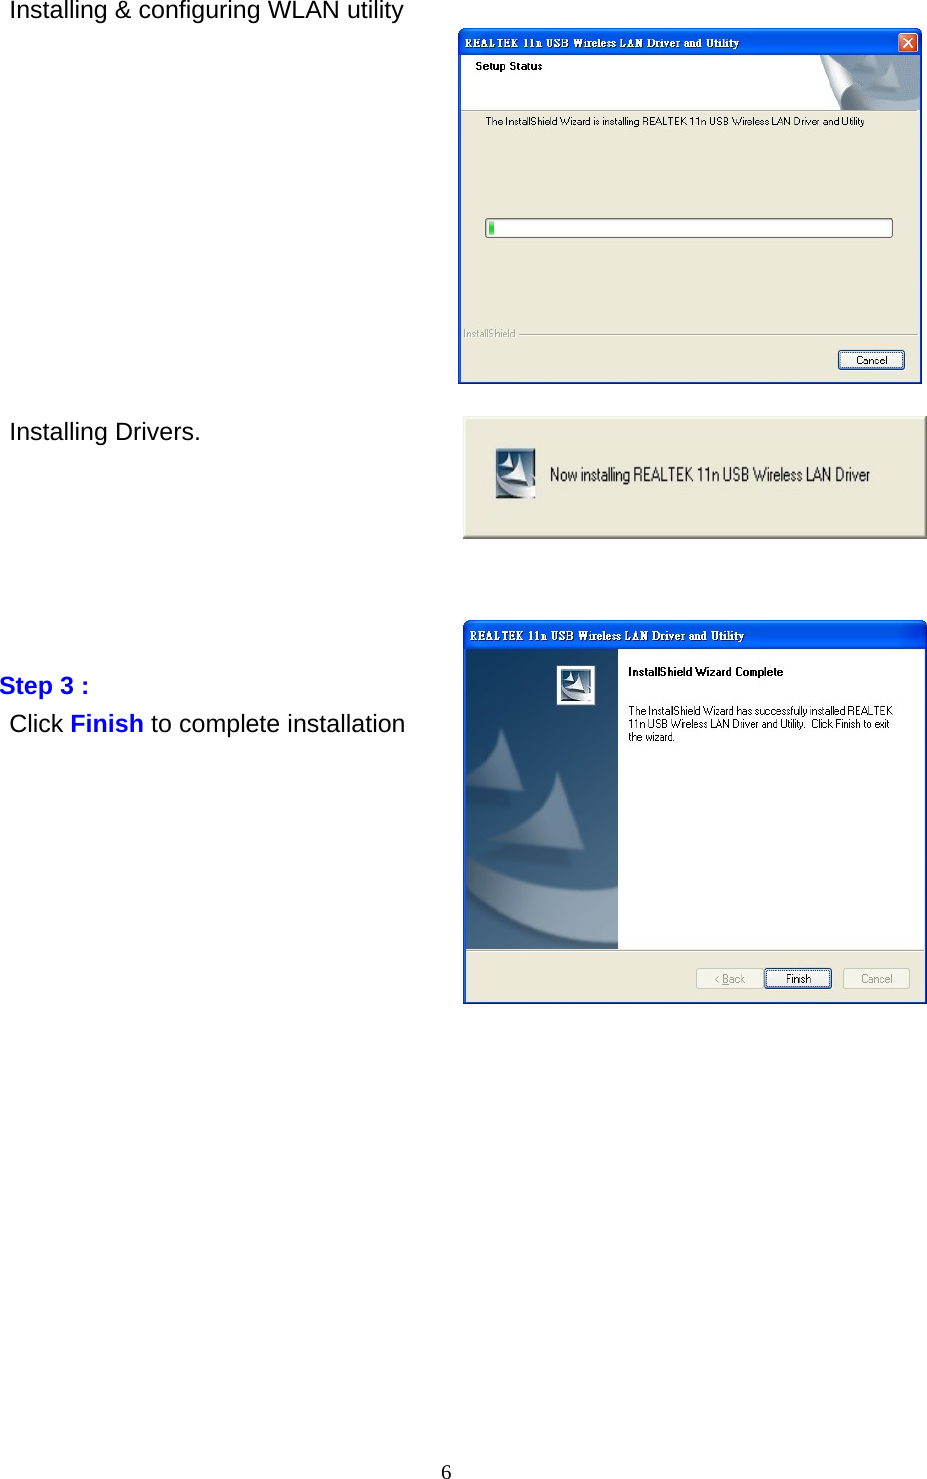 Installing &amp; configuring WLAN utility                 Installing Drivers. 6               Step 3 : Click Finish to complete installation                    